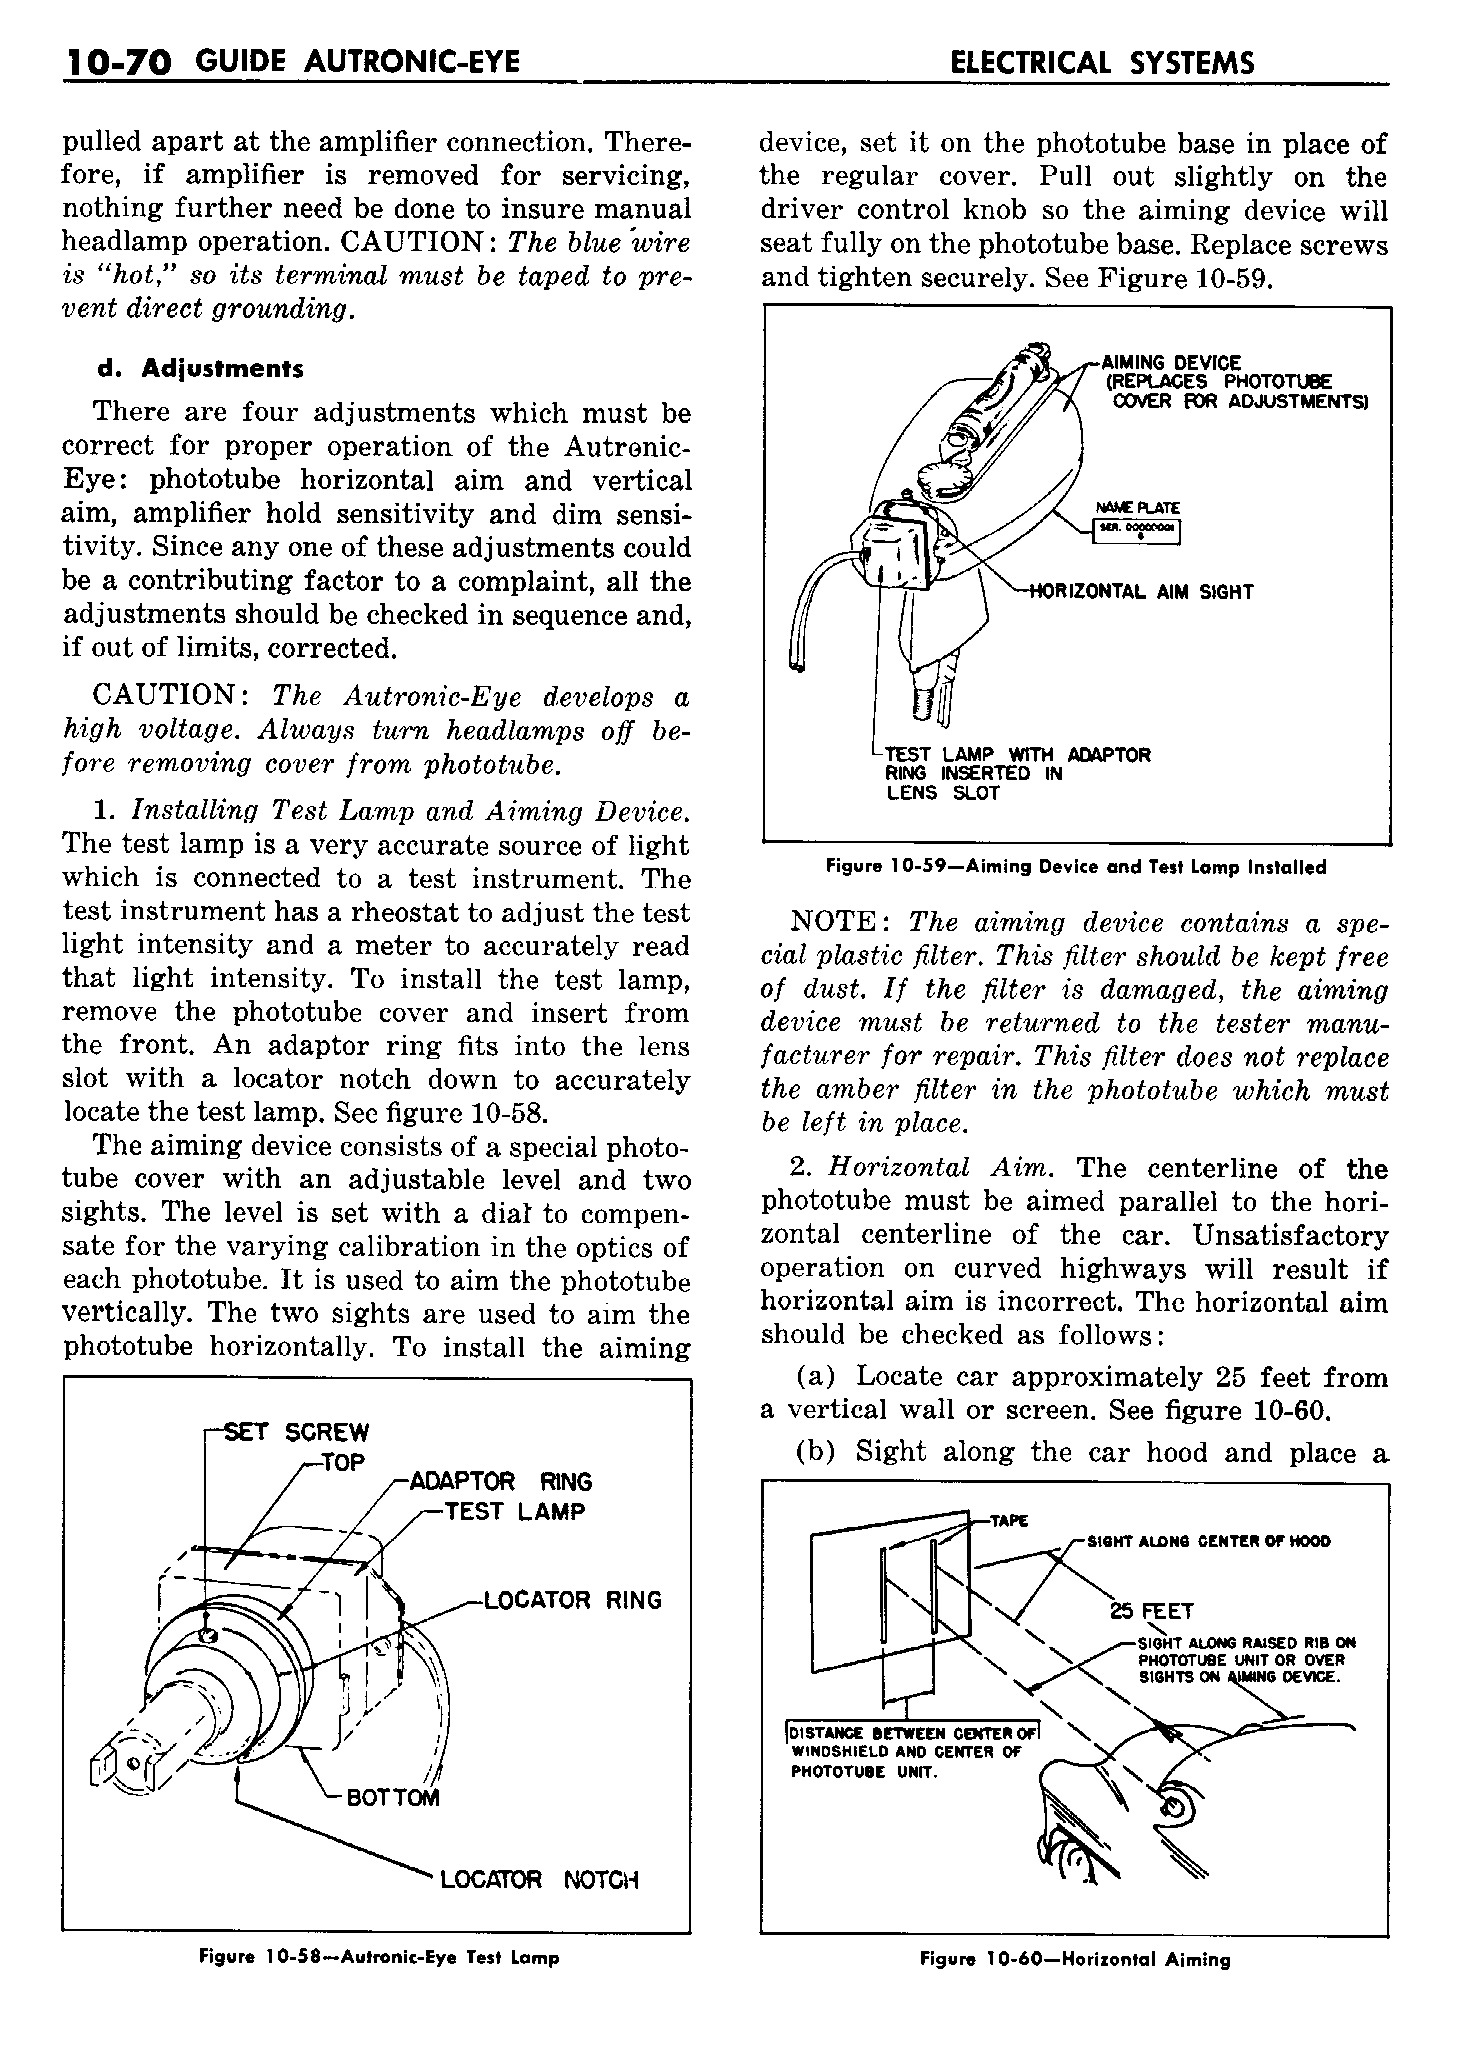 n_11 1958 Buick Shop Manual - Electrical Systems_70.jpg